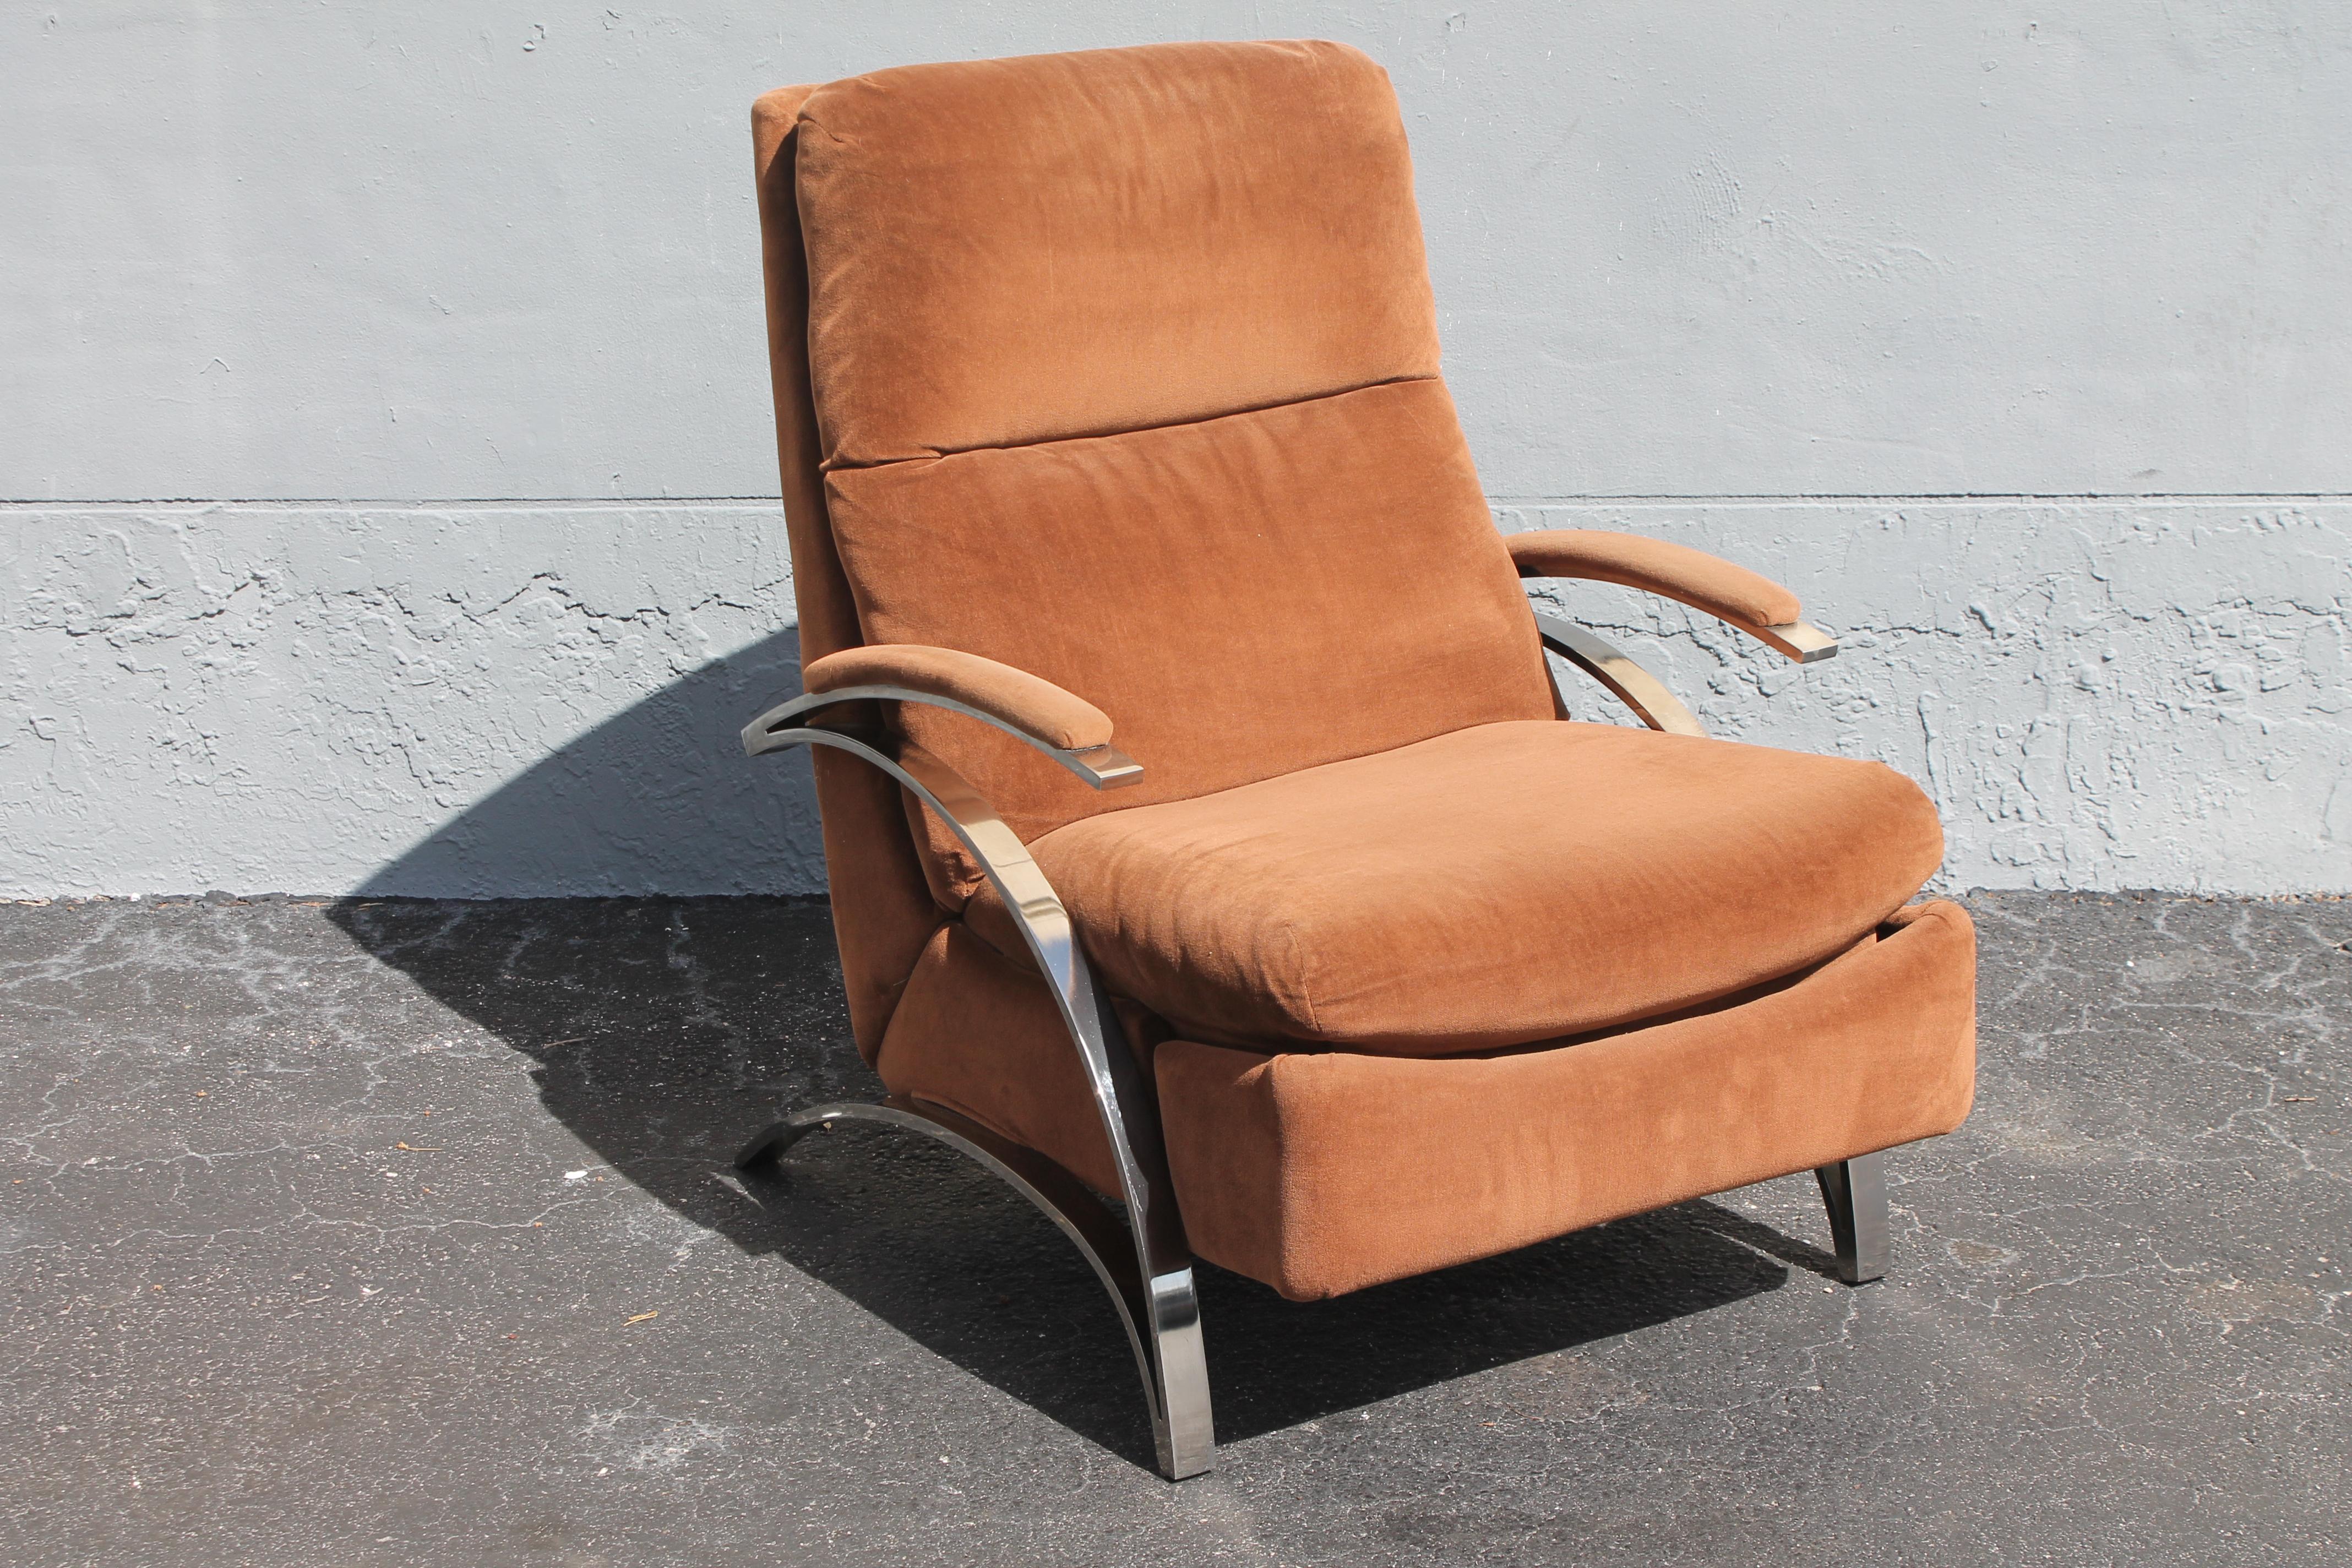 Late 20th Century 1070's Vintage Plush Brown with Chrome Recliner/ Barcalounger Chair For Sale